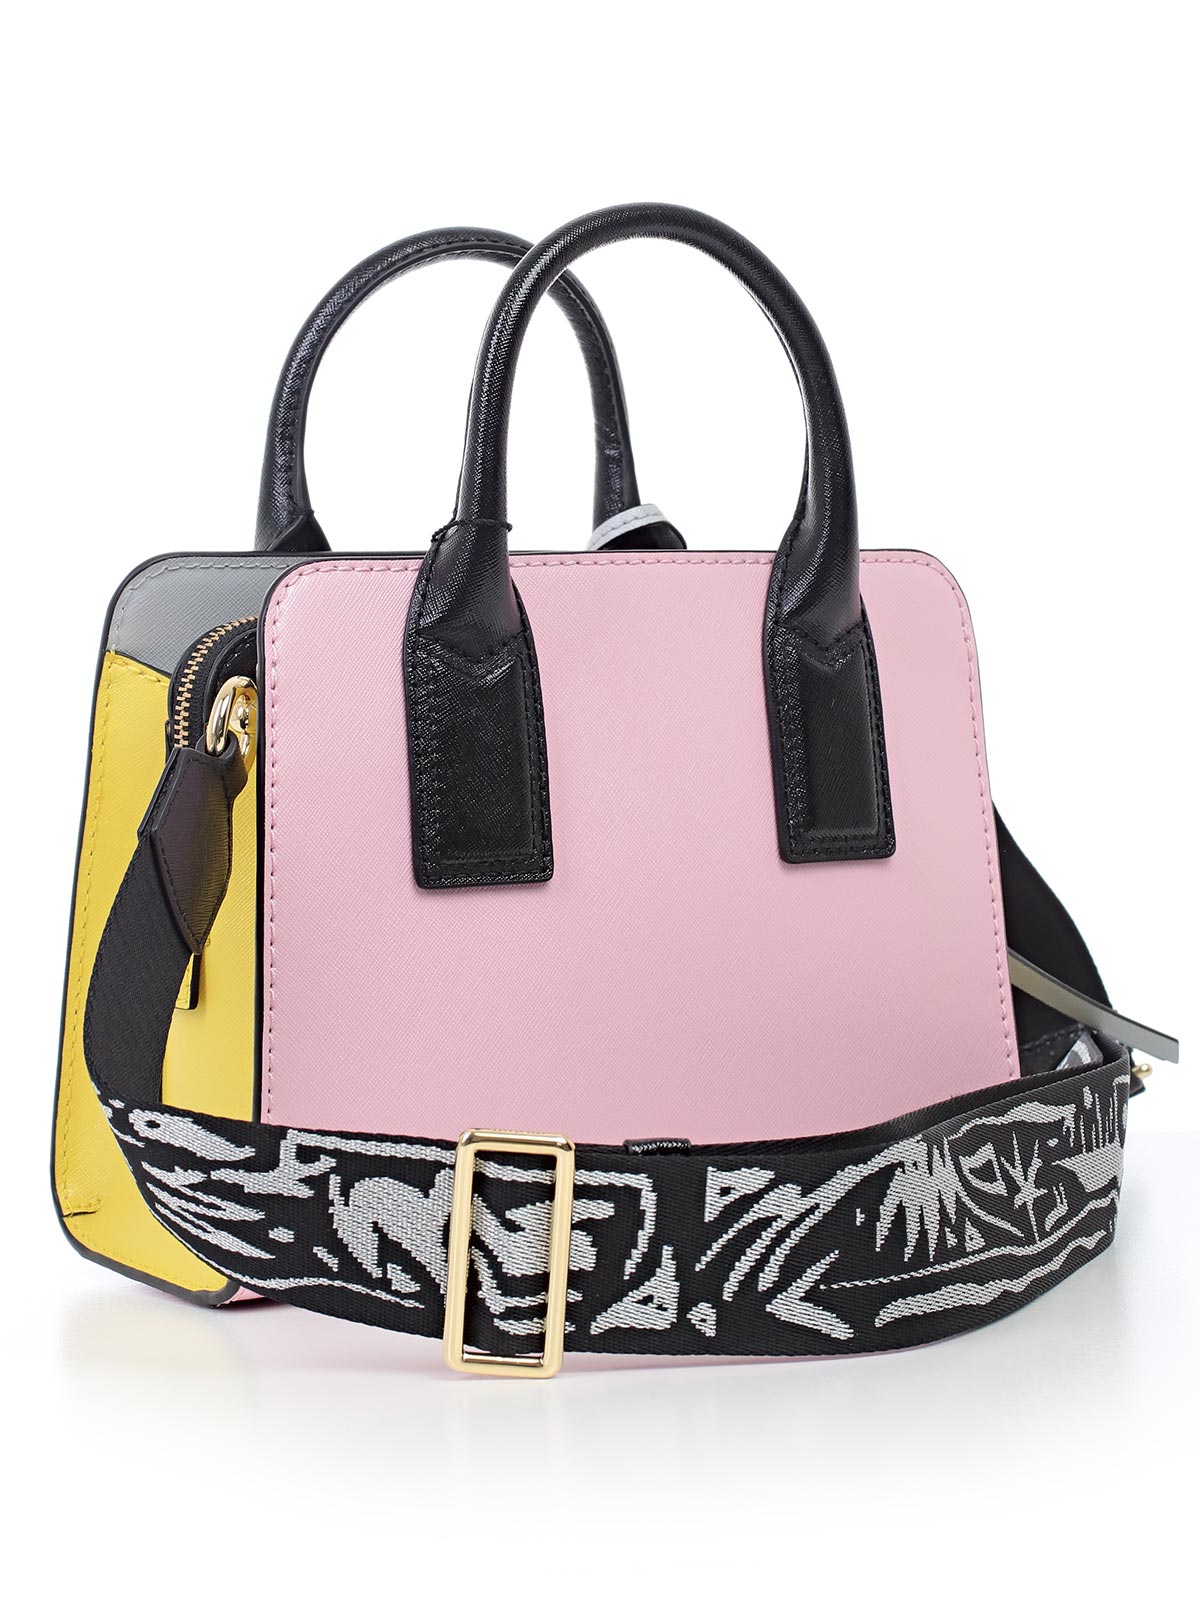 Marc Jacobs Bags M0013267|083 - 690 BABY PINK MULTI.Bernardelli Store - Online fashion store for ...